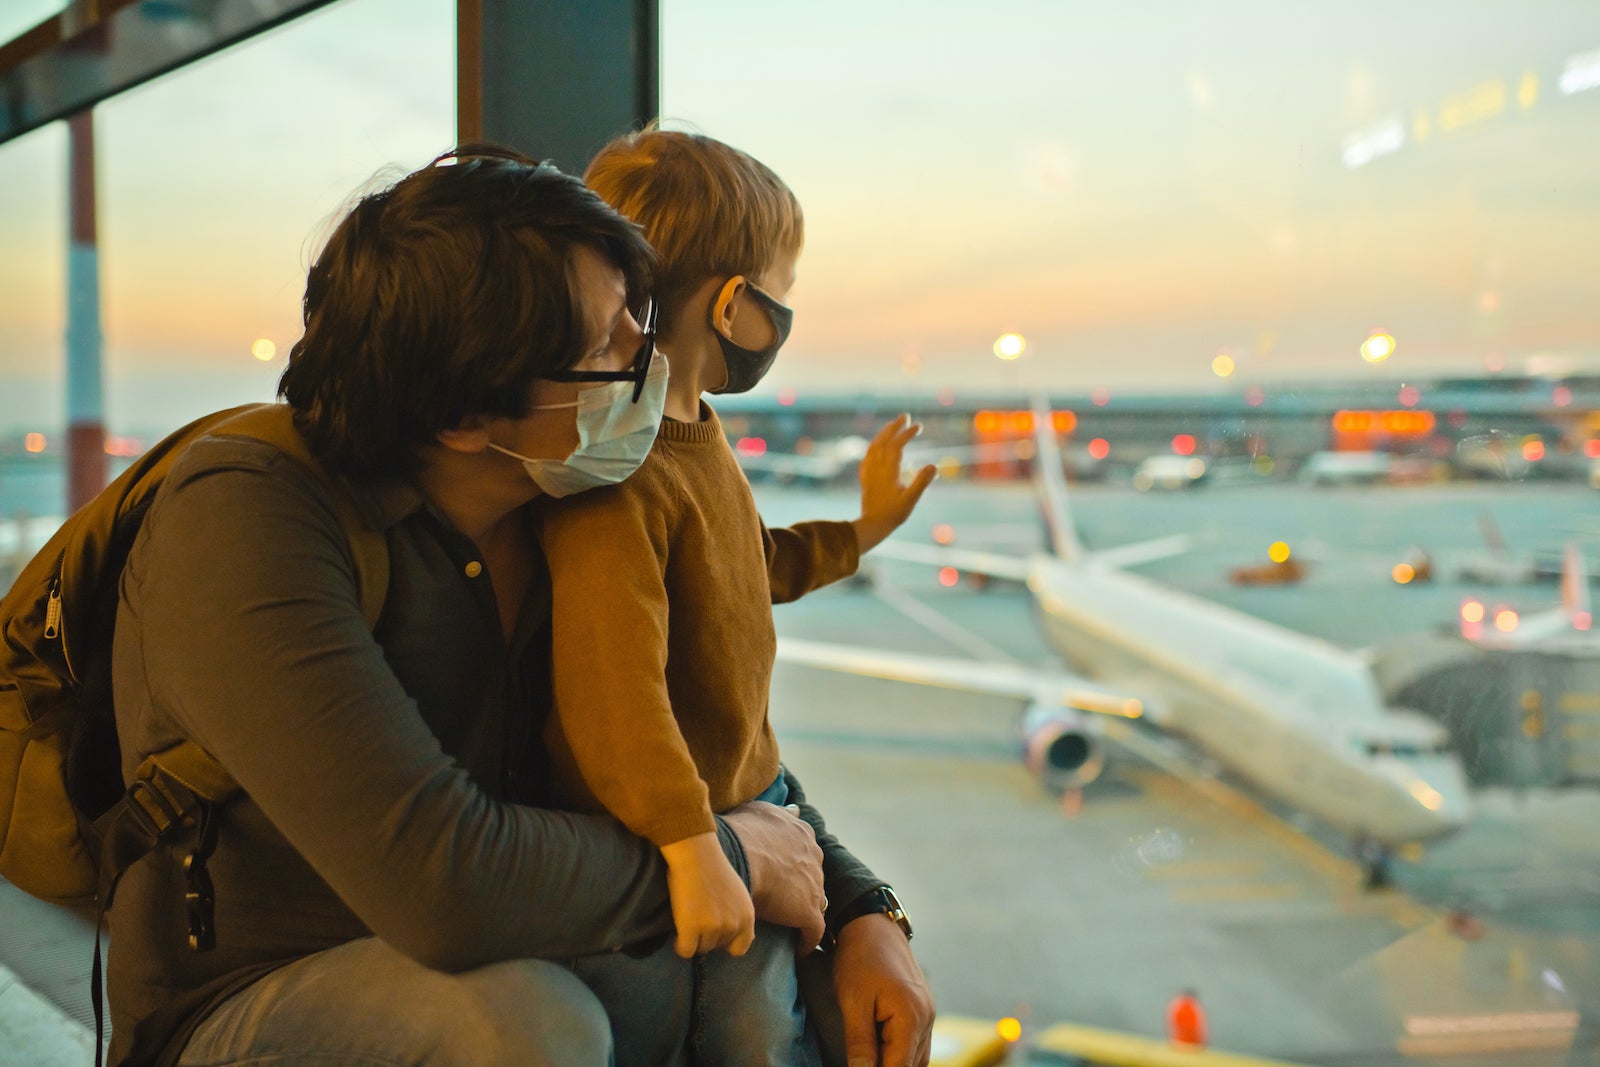 Dad and son wearing masks and looking out of an airport window.